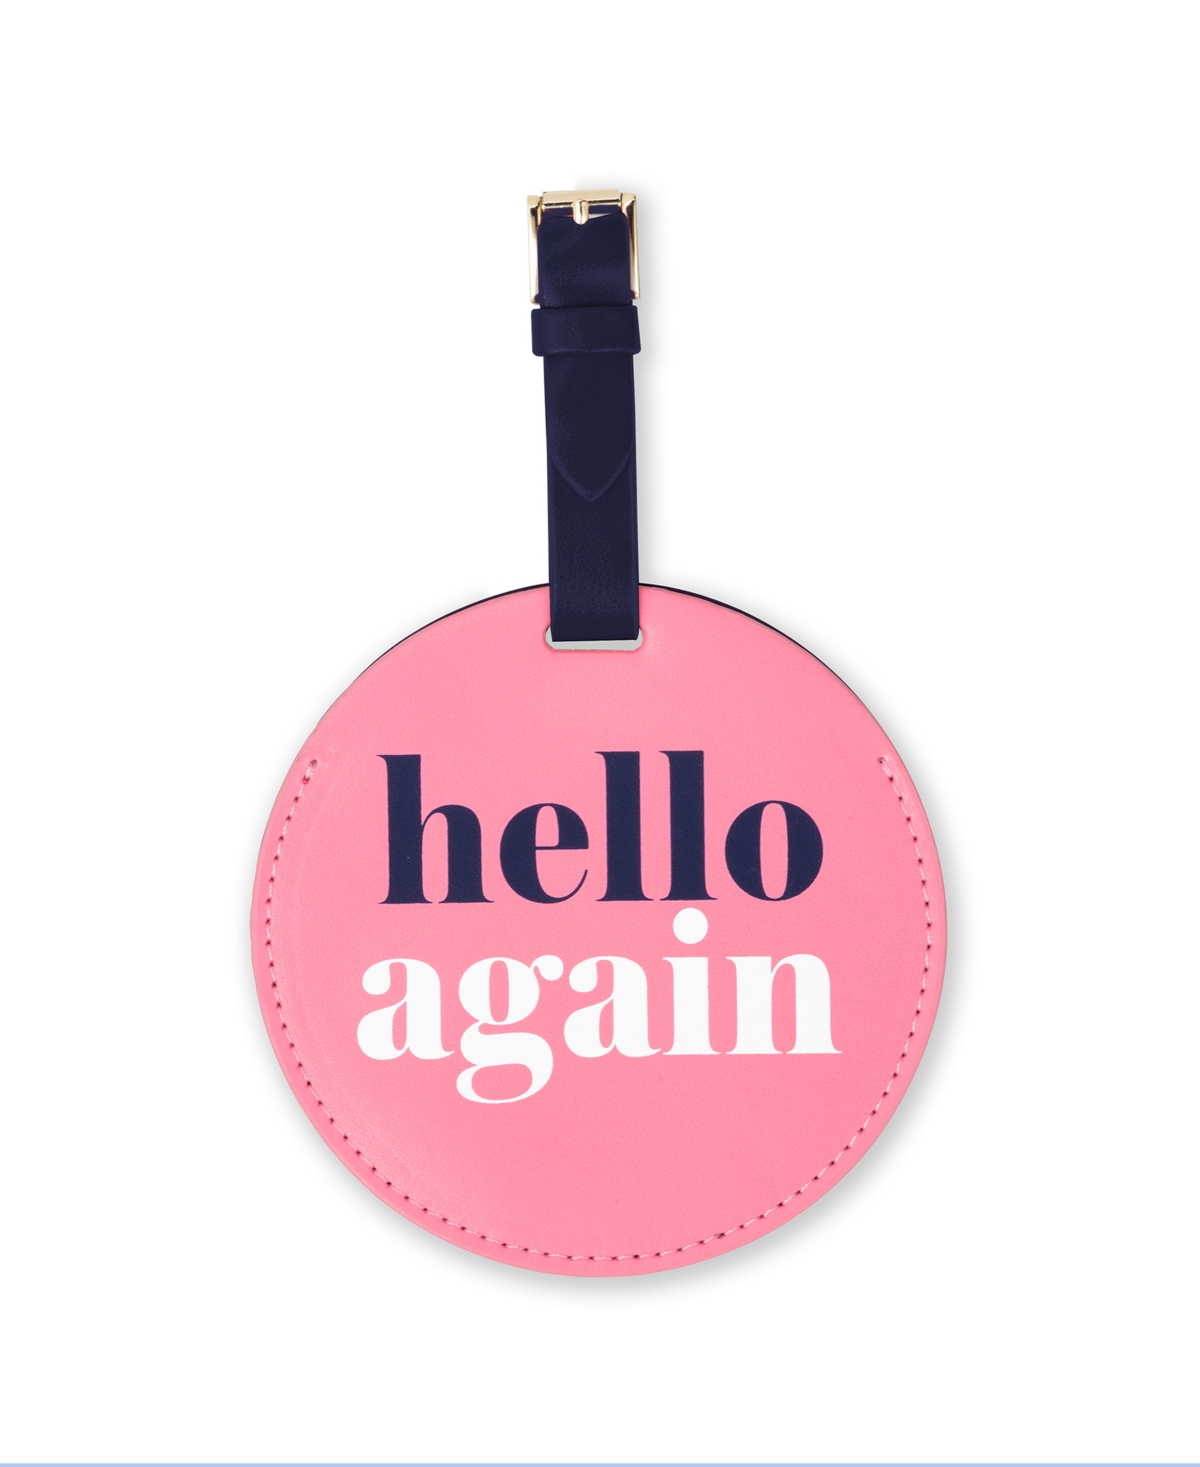 Kate Spade "hello Again" Luggage Tag With Adjustable Strap